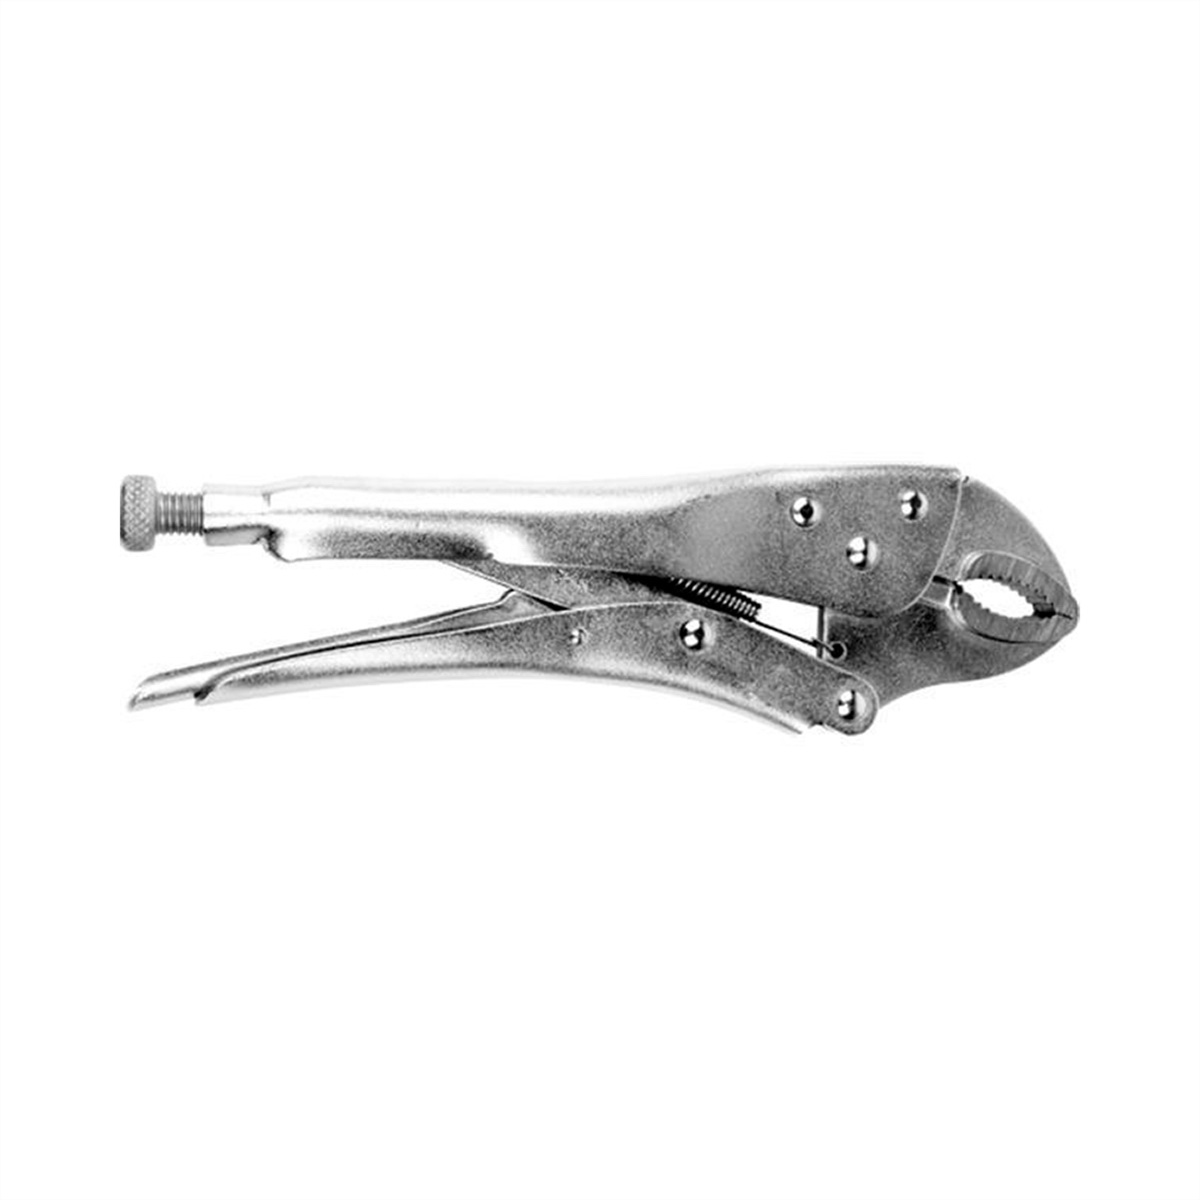 Performance Tool W30754 Performance Tool W30754 7 Curved Jaw Locking  Pliers Sale, Reviews. - Opentip